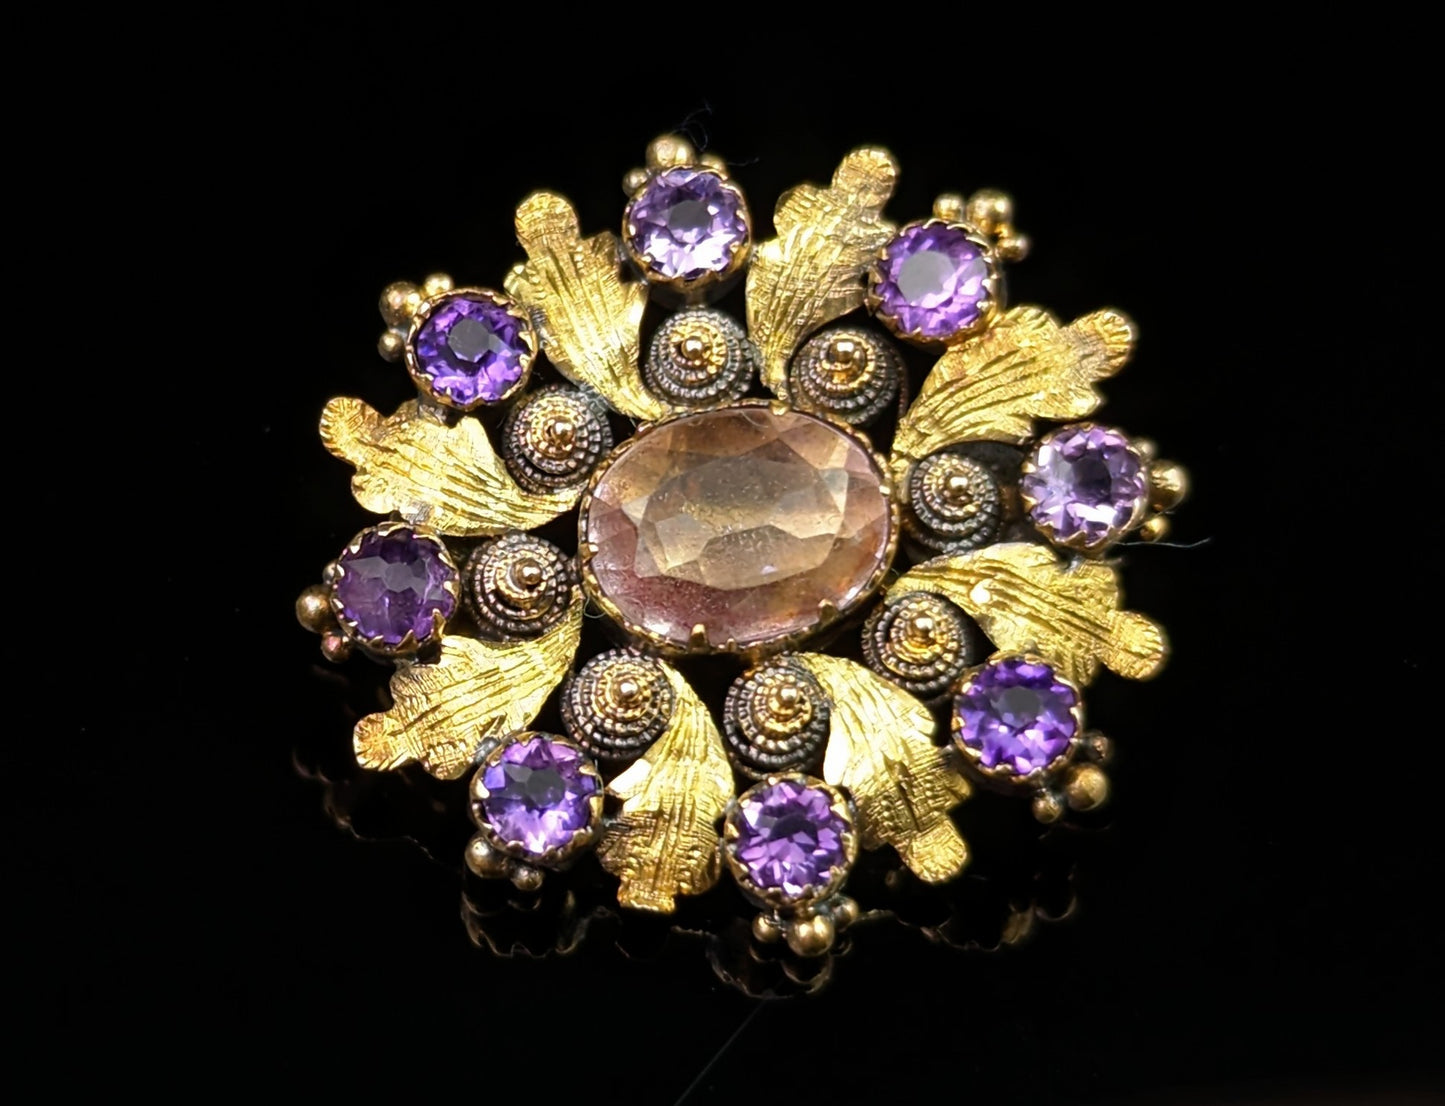 Antique Georgian Amethyst and Cannetille work brooch, 18ct gold, Acanthus Leaf